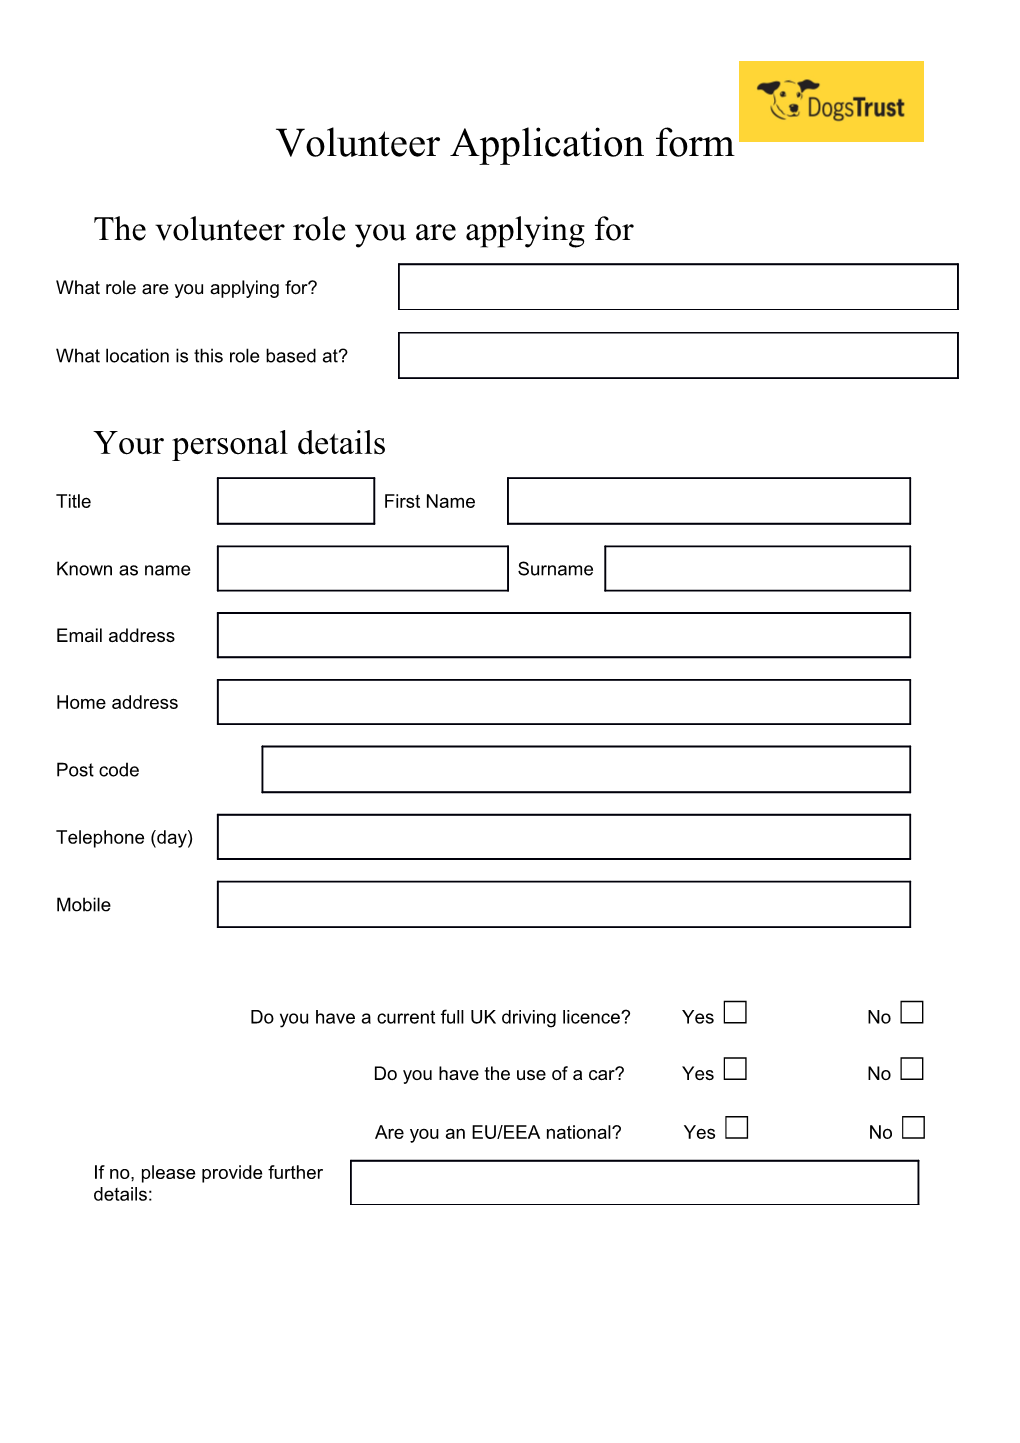 The Volunteer Role You Are Applying For